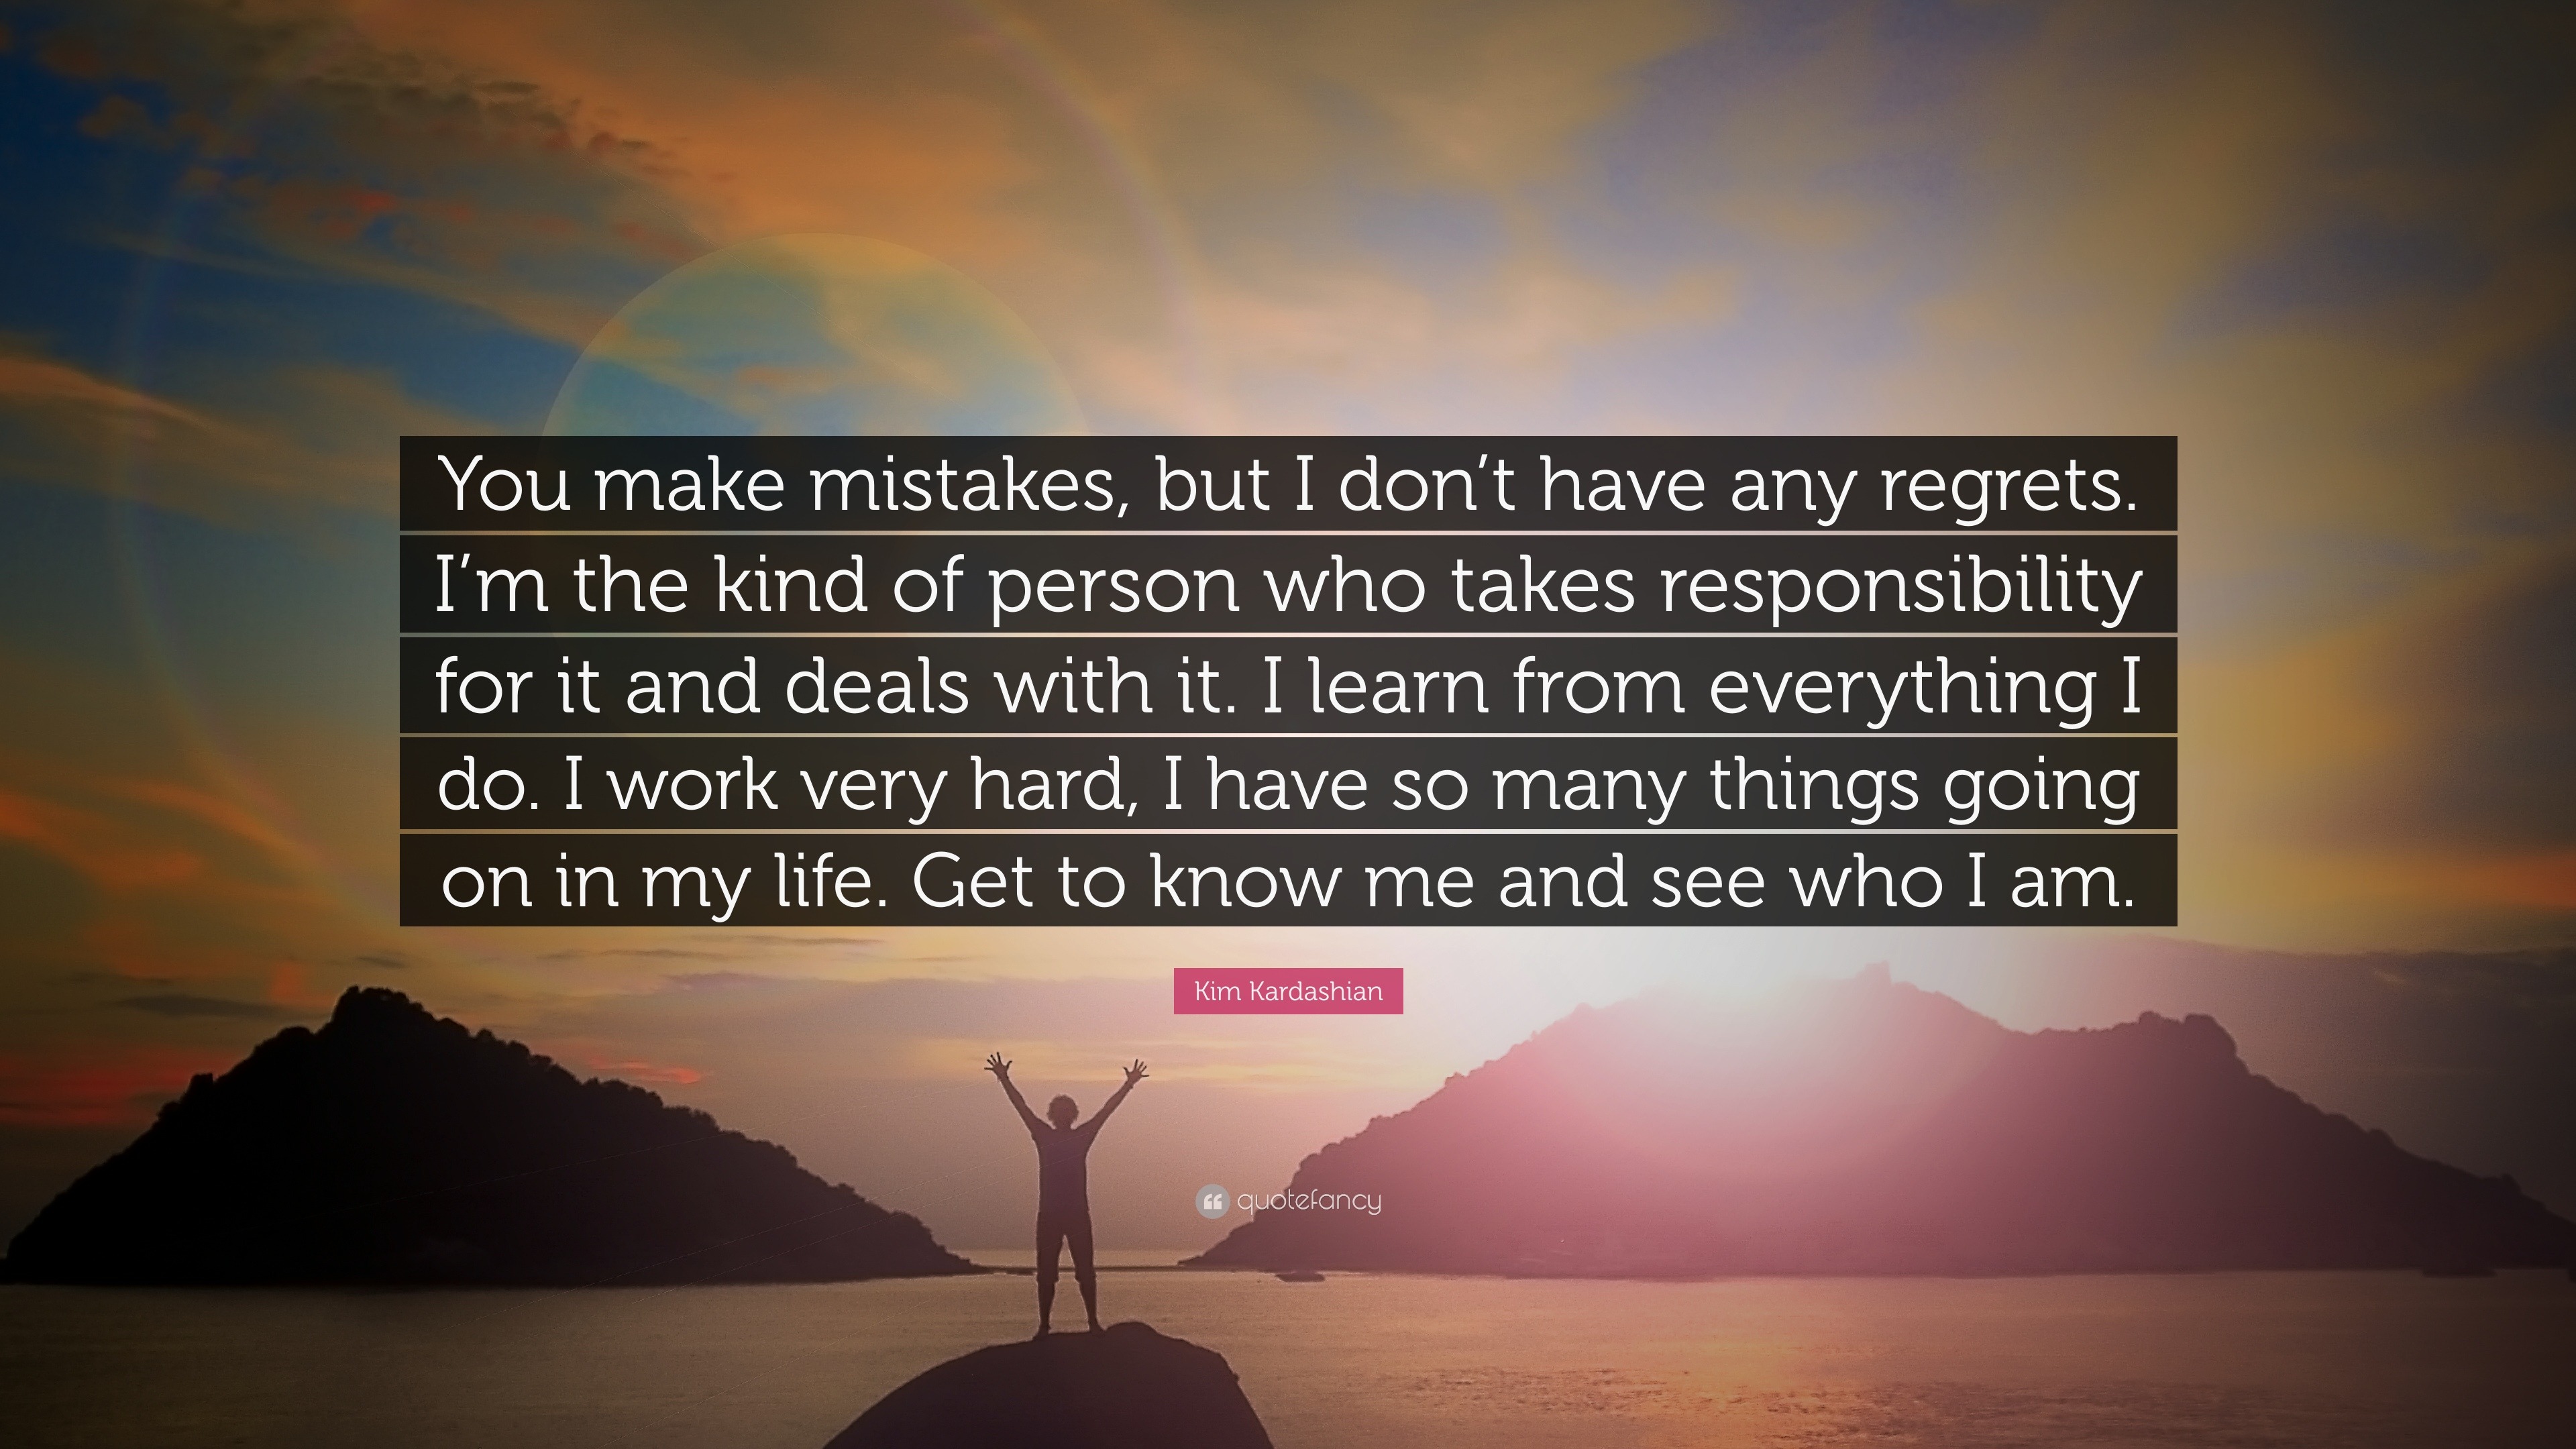 Kim Kardashian Quote: “You make mistakes, but I don’t have any regrets ...